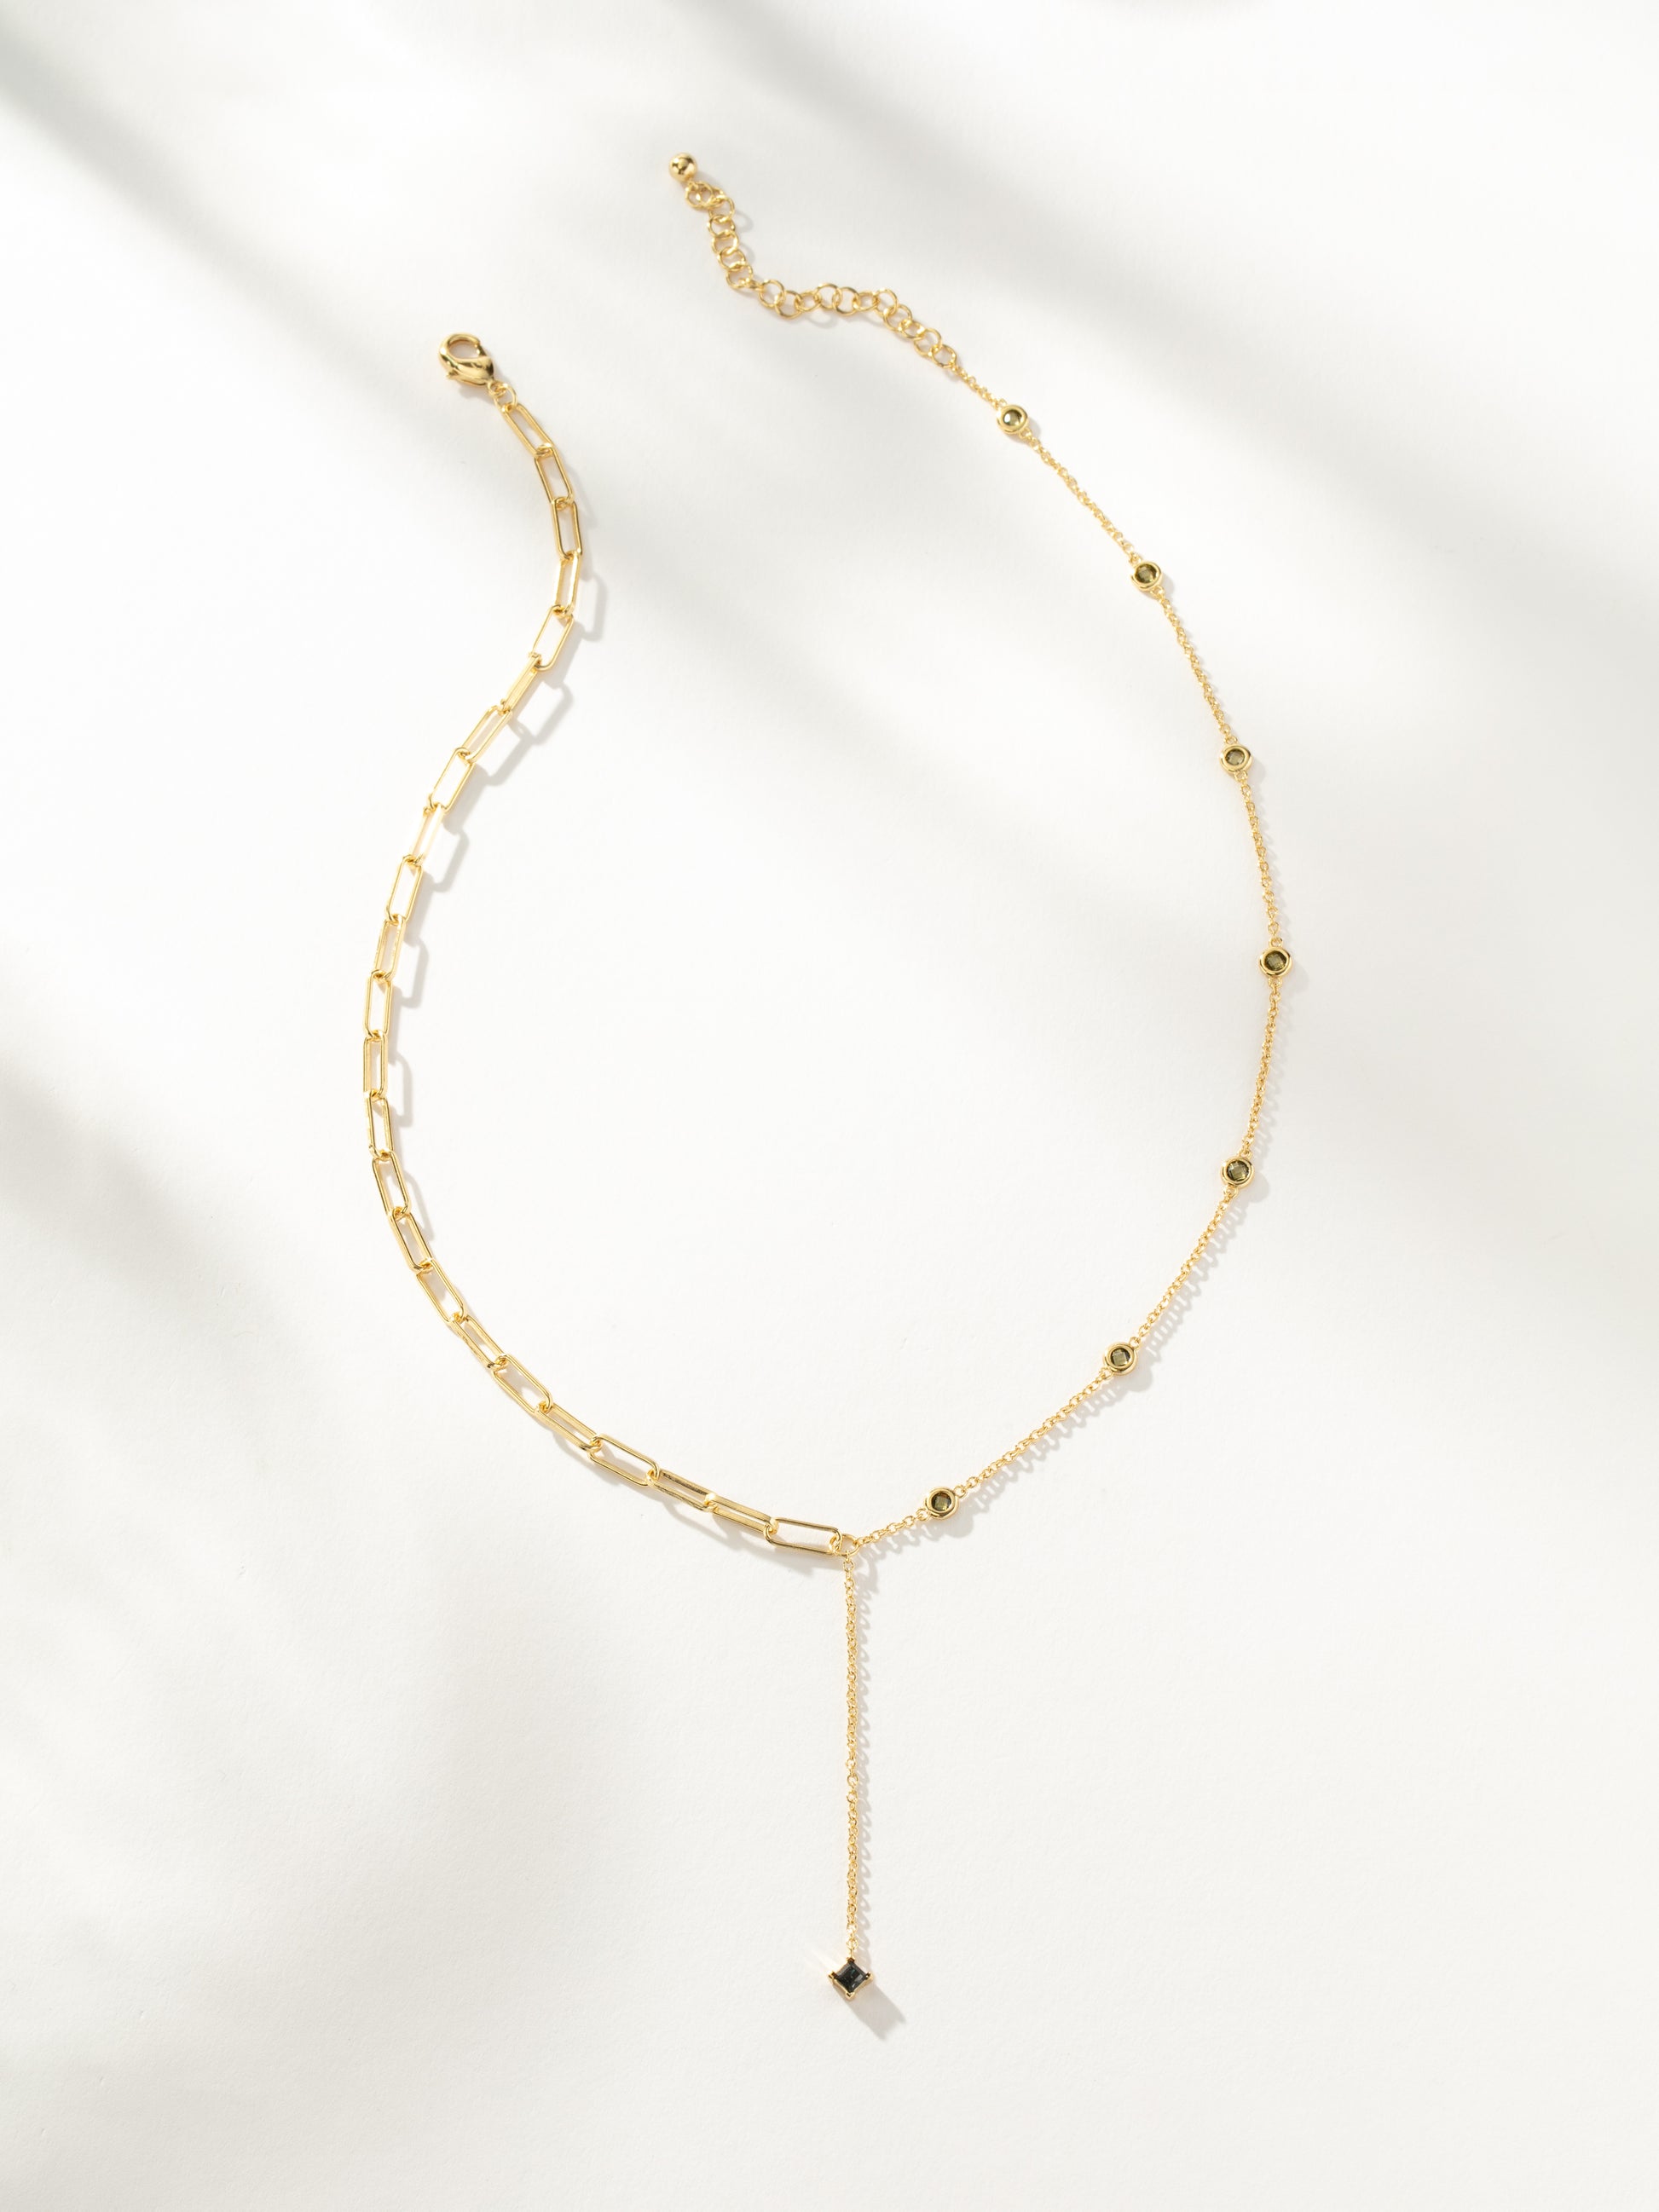 Undecided Necklace | Gold | Product Image | Uncommon James